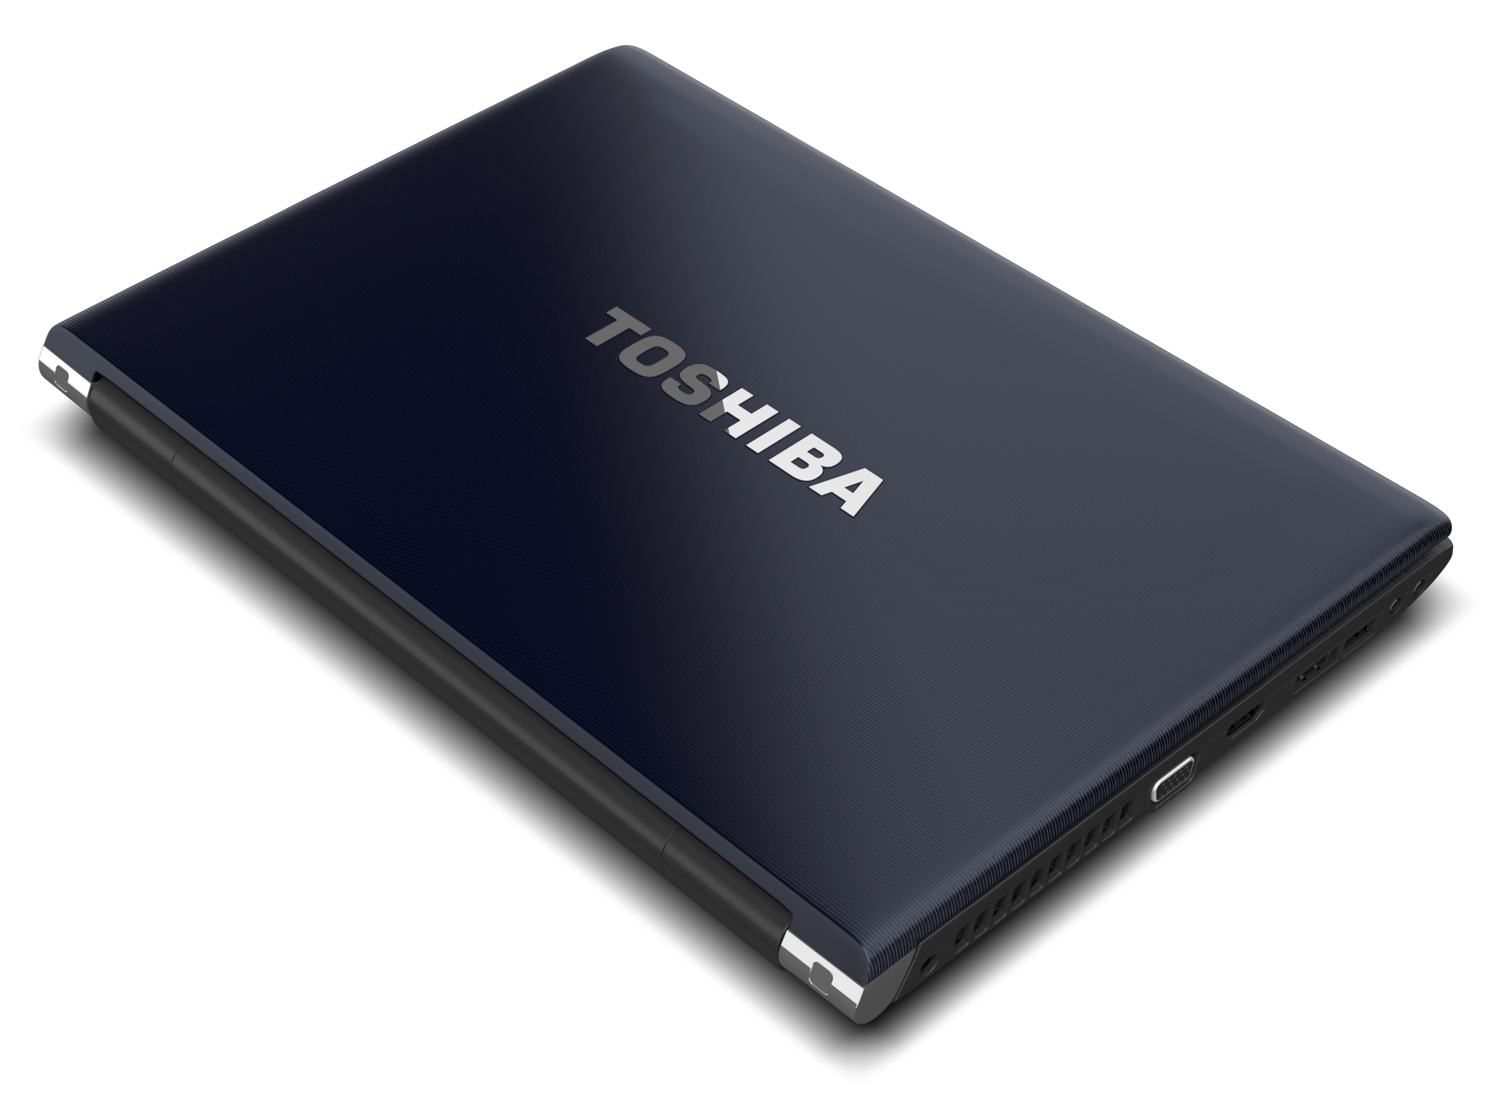 http://thetechjournal.com/wp-content/uploads/images/1202/1330098068-toshiba-satellite-r845s85-140inch-led-laptop-5.jpg